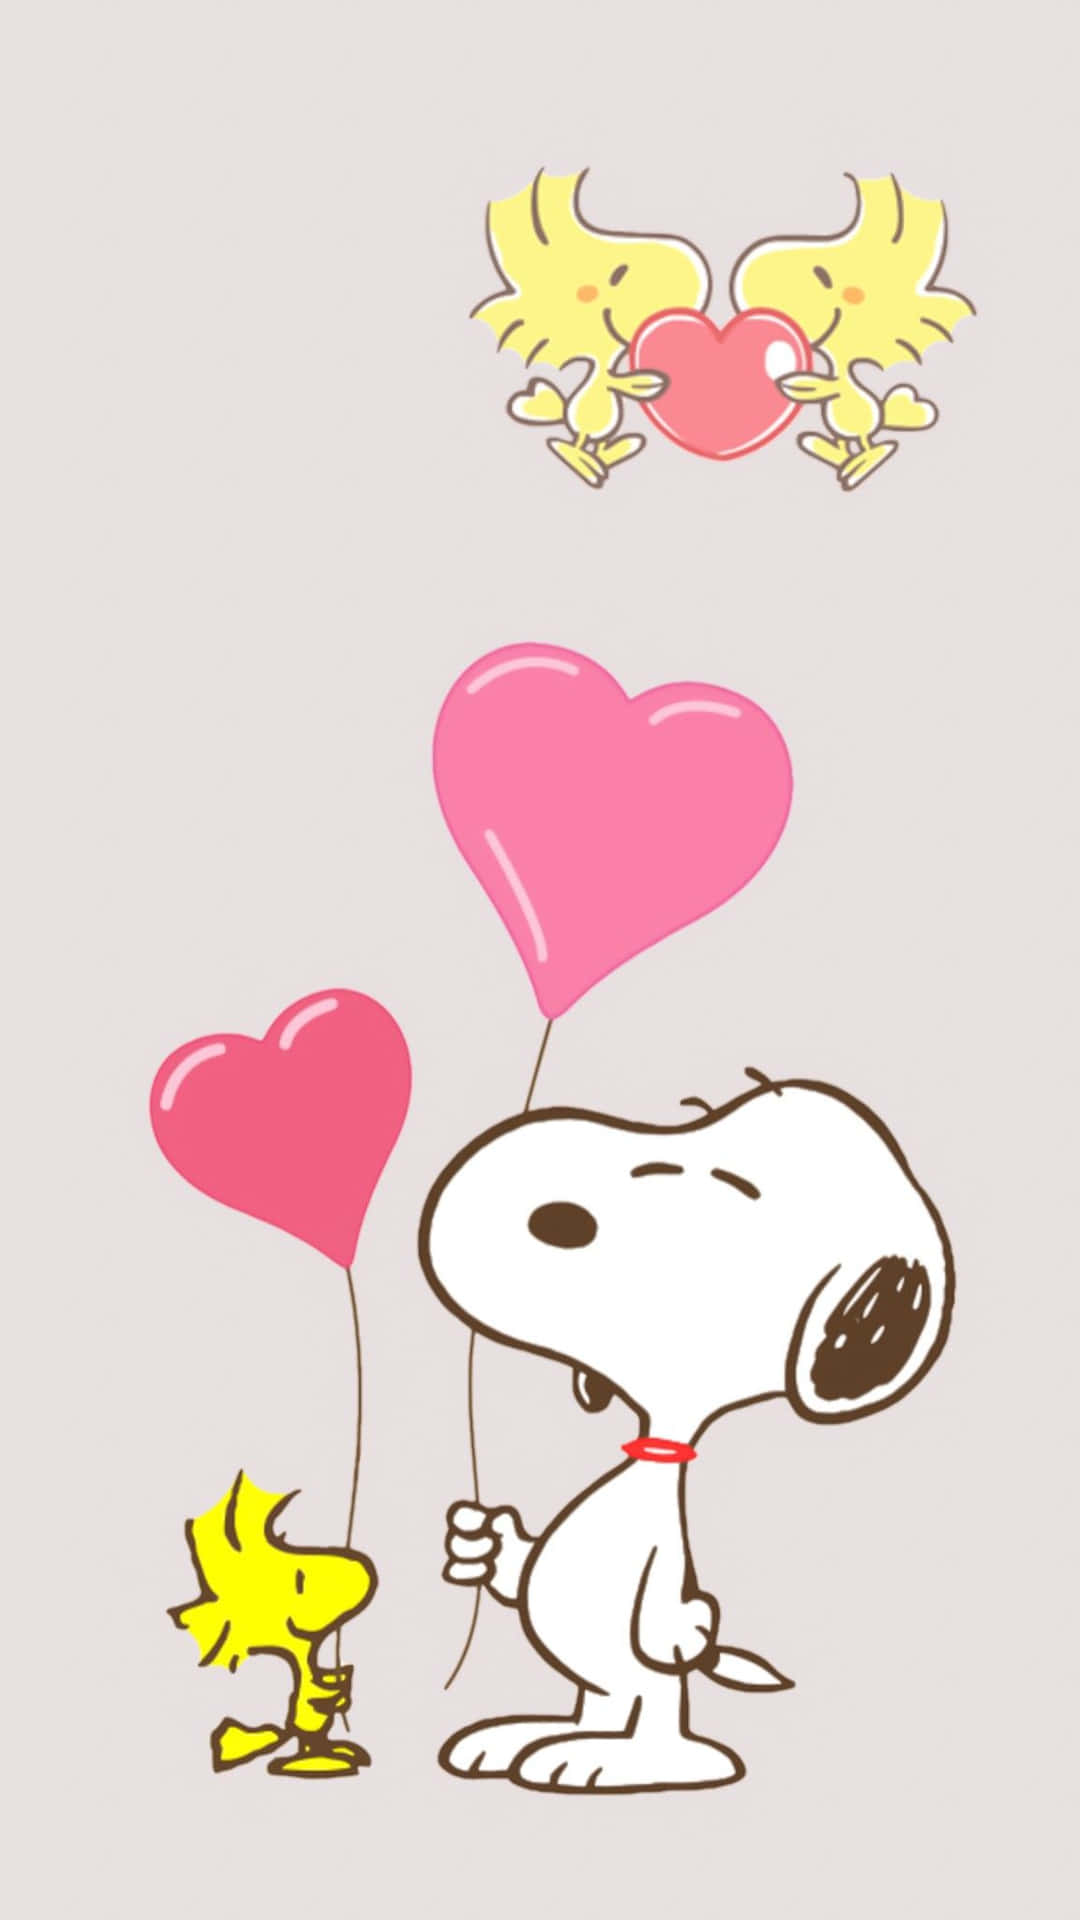 Snoopy And A Bird Holding Balloons Background